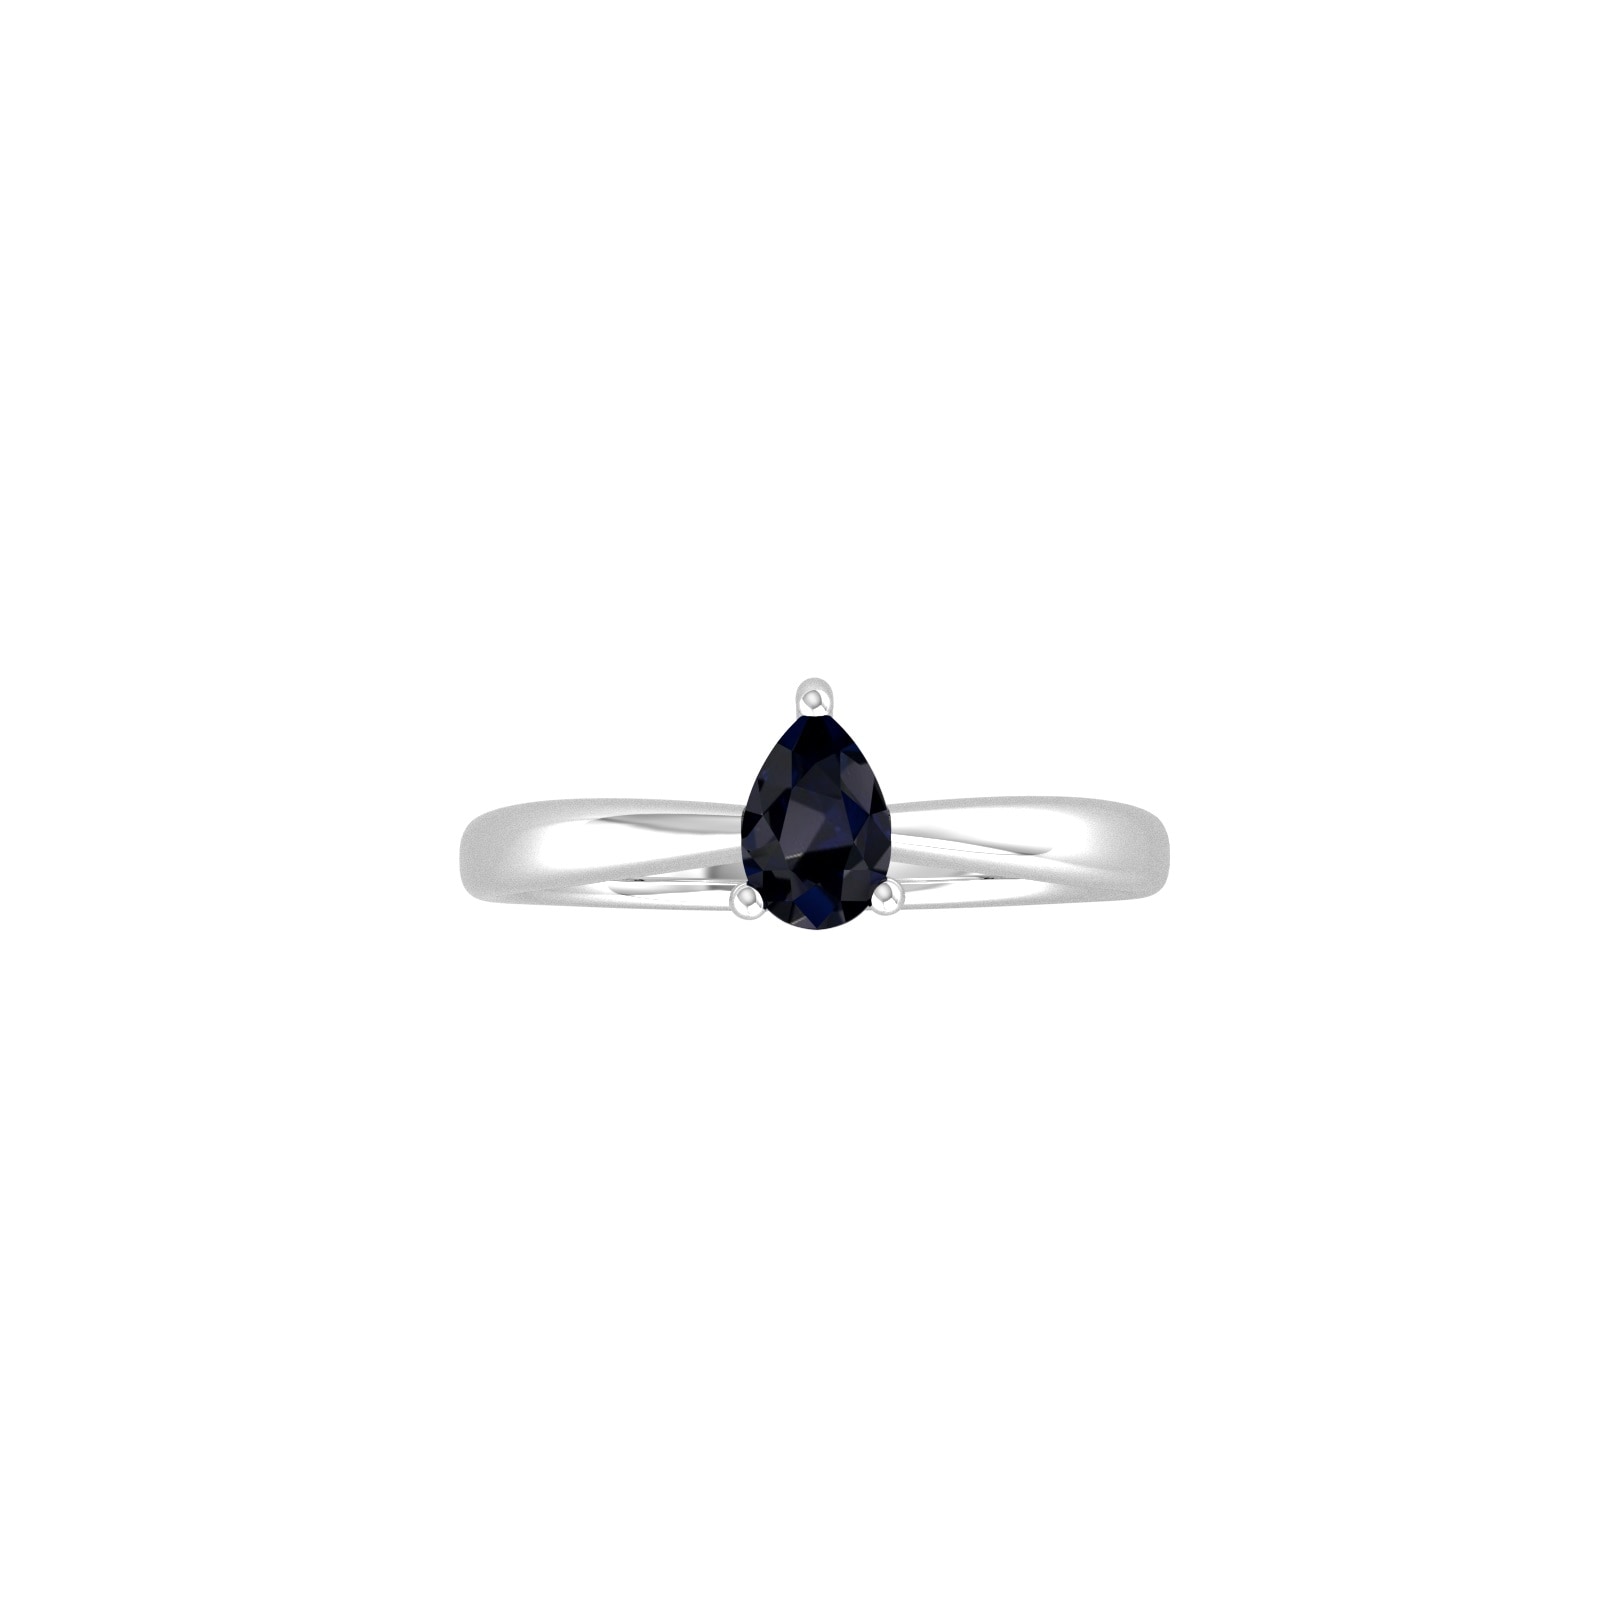 9ct White Gold 4 Claw Pear Cut Sapphire Ring